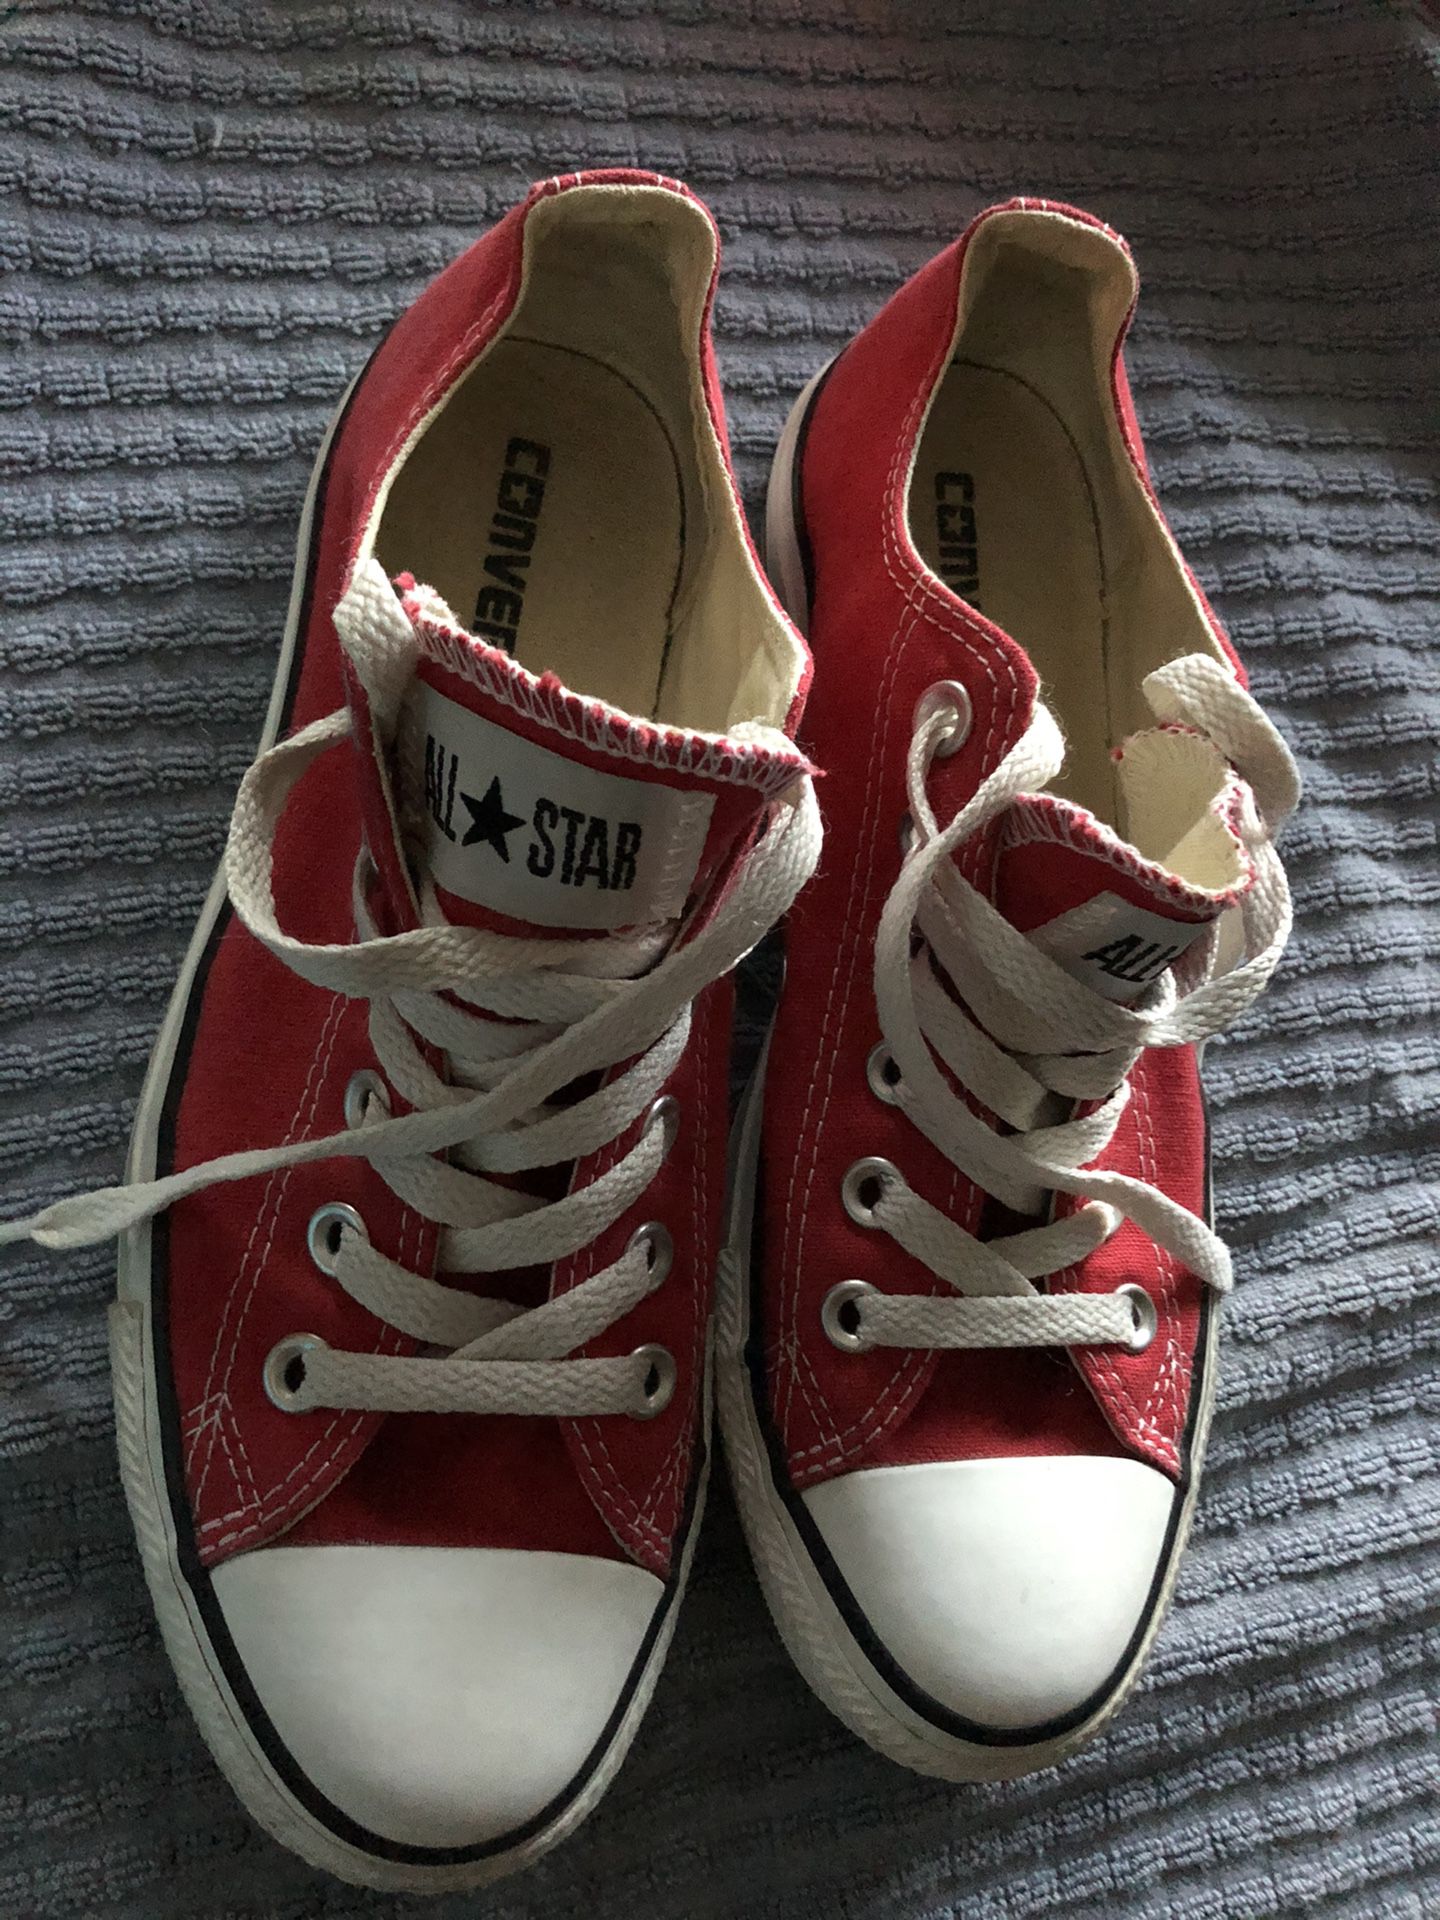 Red low top CONVERSE ALL STARS SNEAKERS TENNIS SHOES Men size 5 Women’s size 7